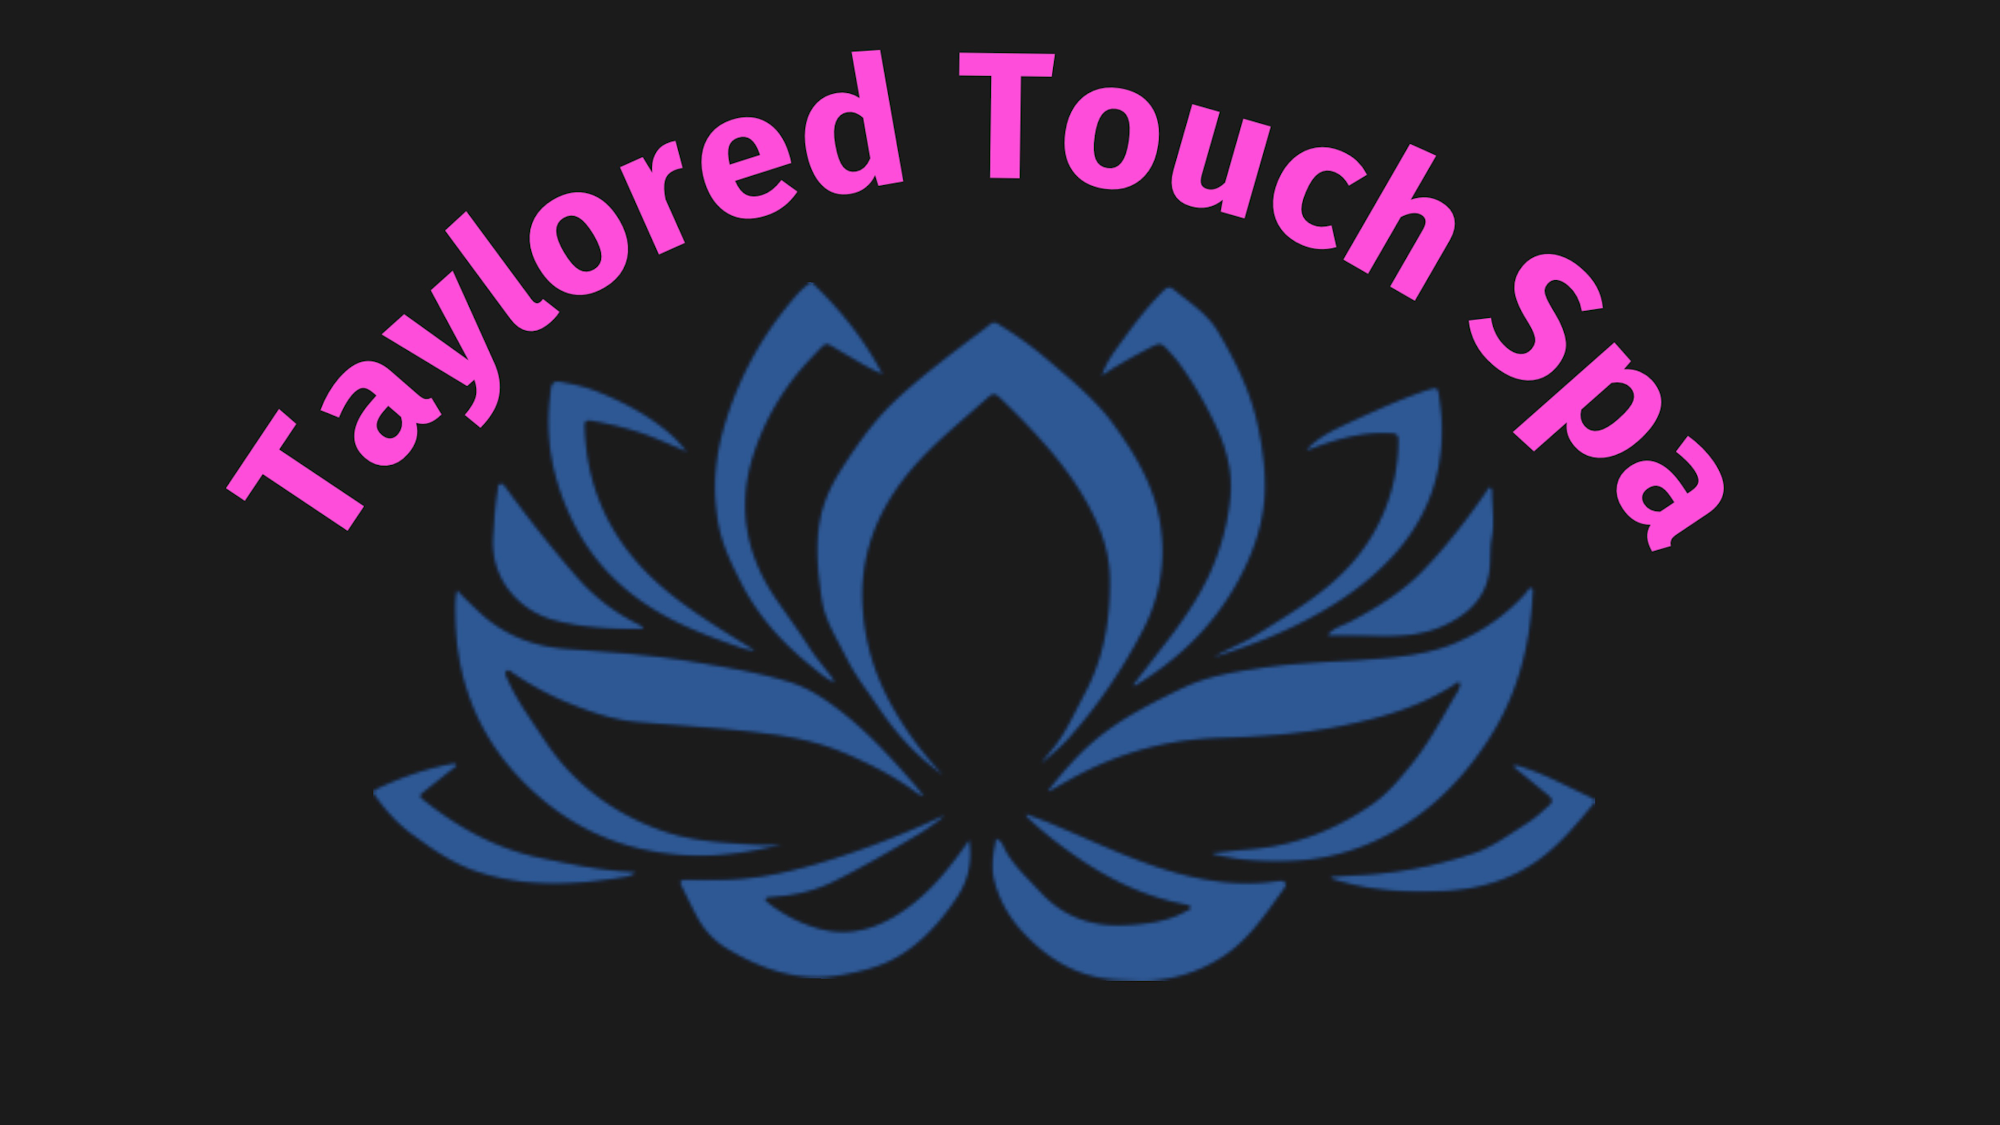 Taylored Touch Spa 1216 Woodlawn Dr, Byrdstown Tennessee 38549